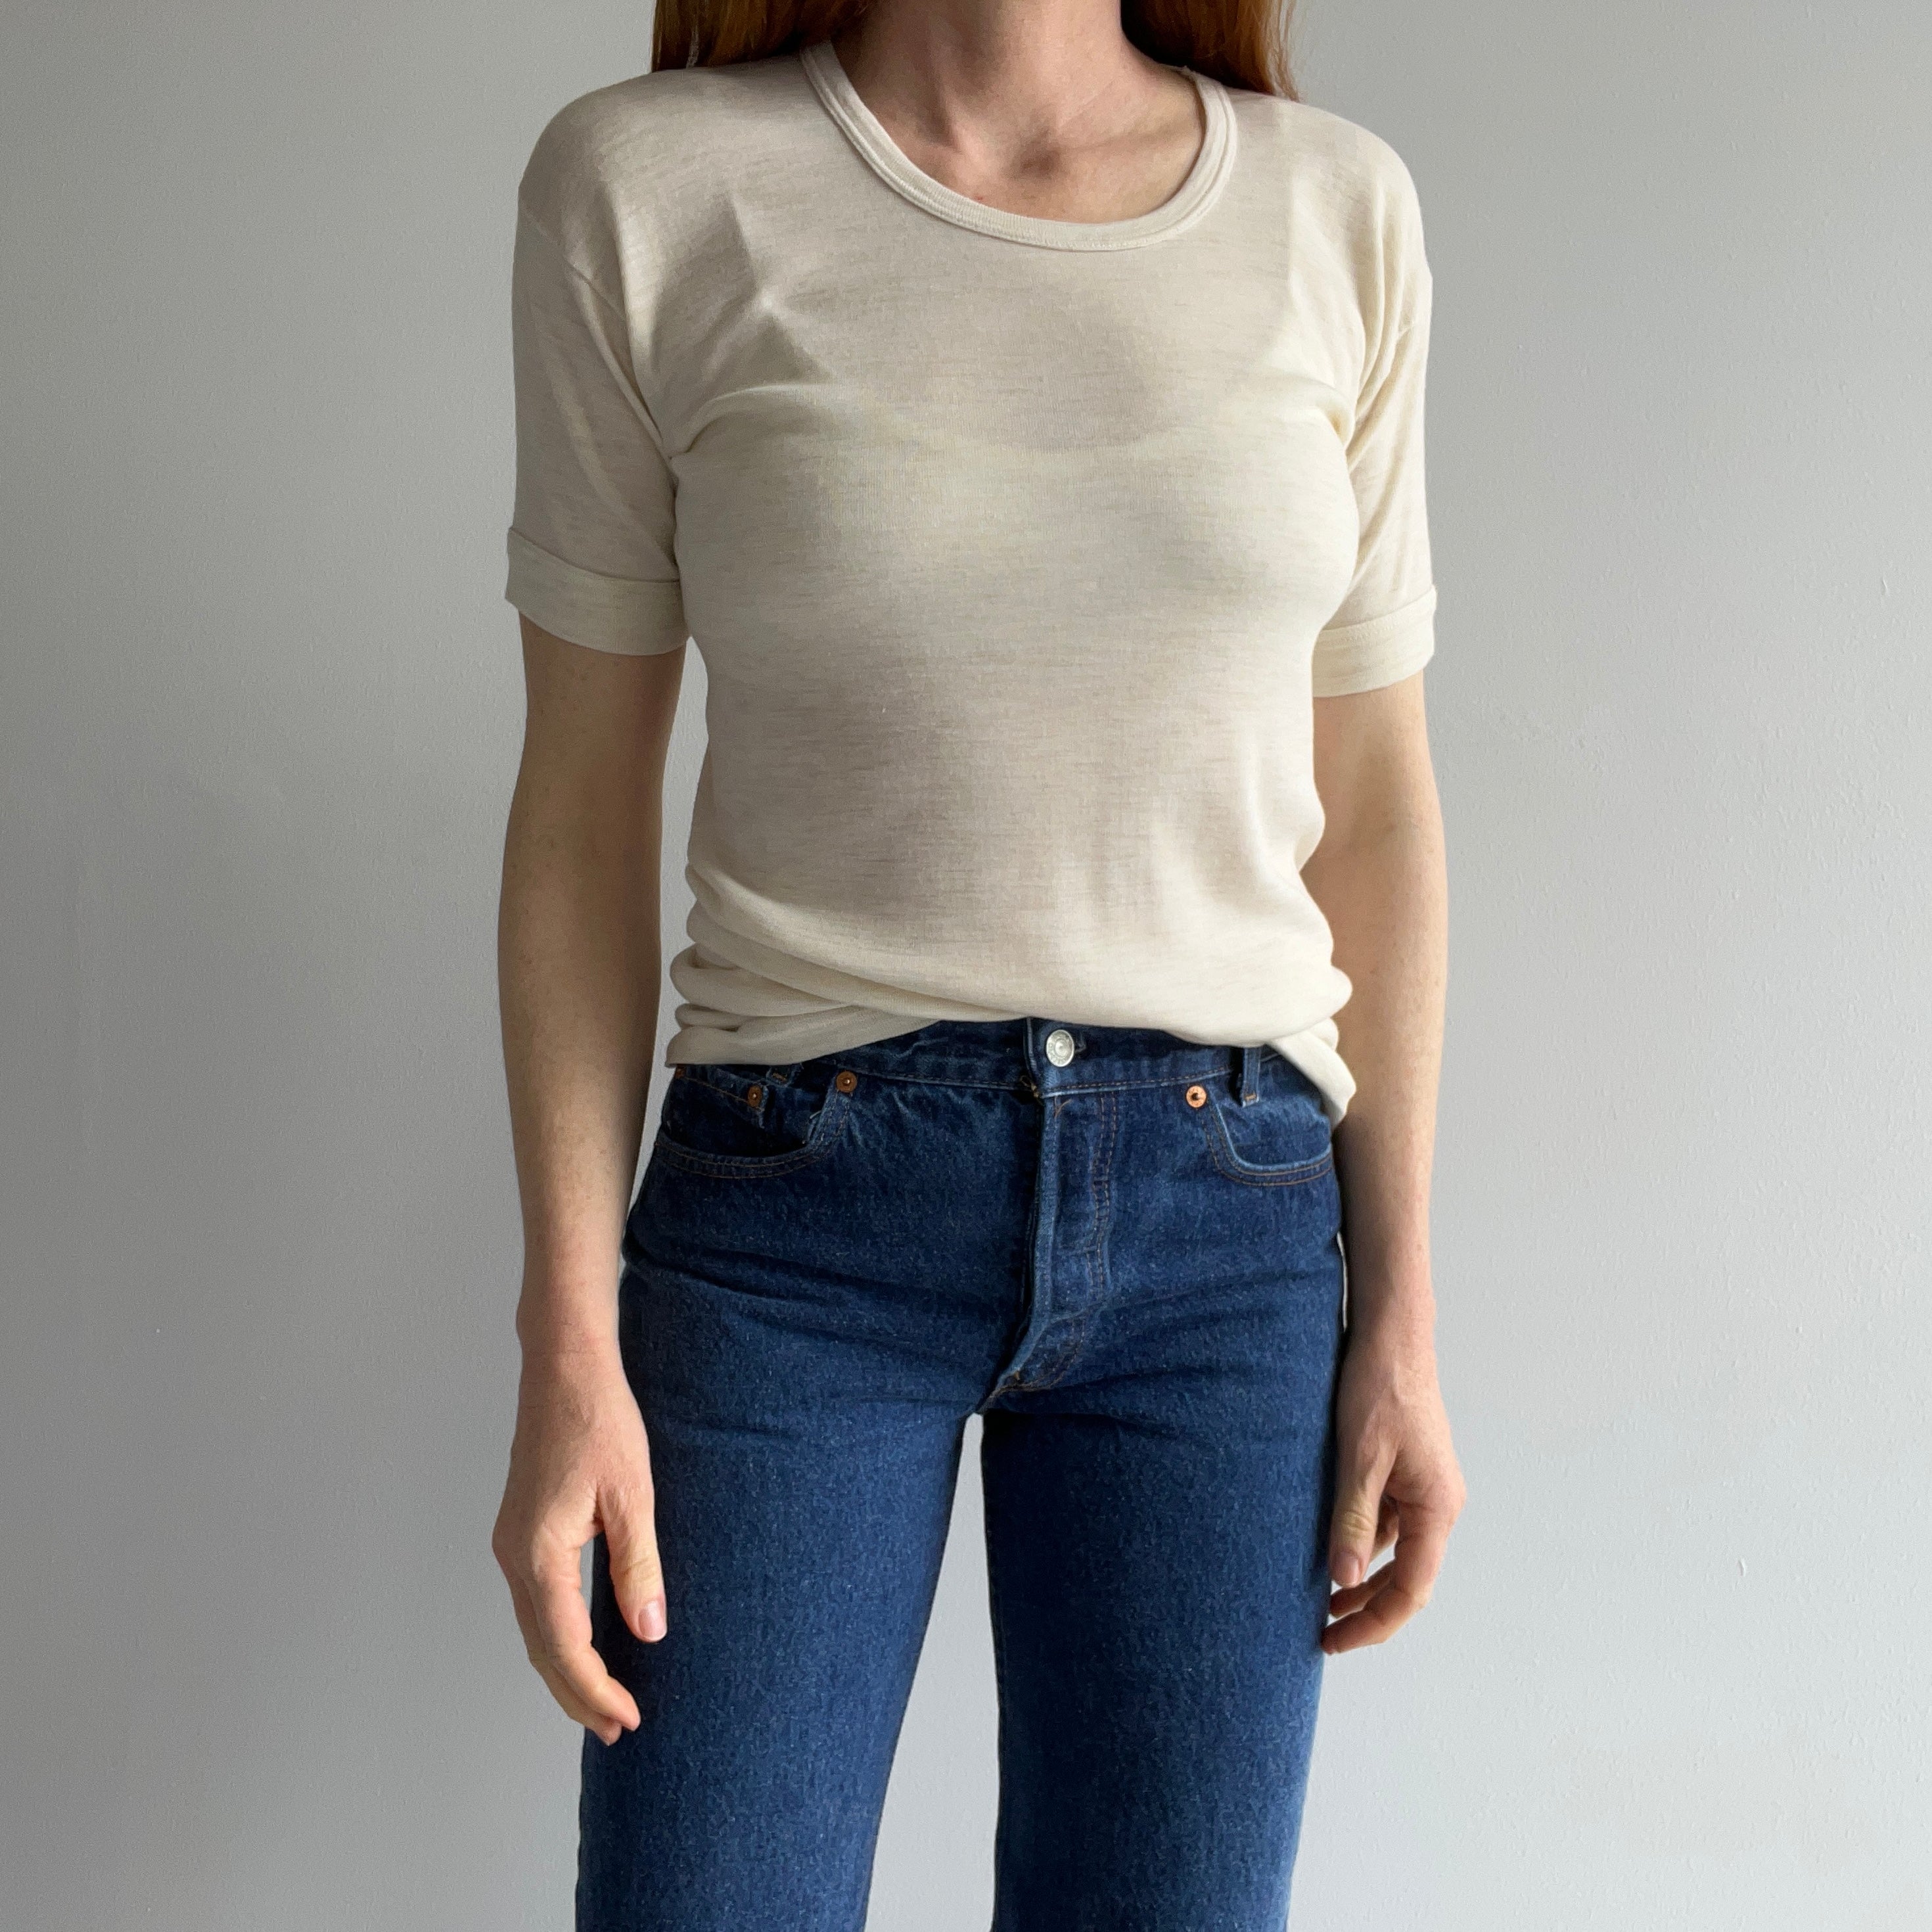 1970s Super Strechy/Slouchy Oatmeal Short Sleeve Thermal